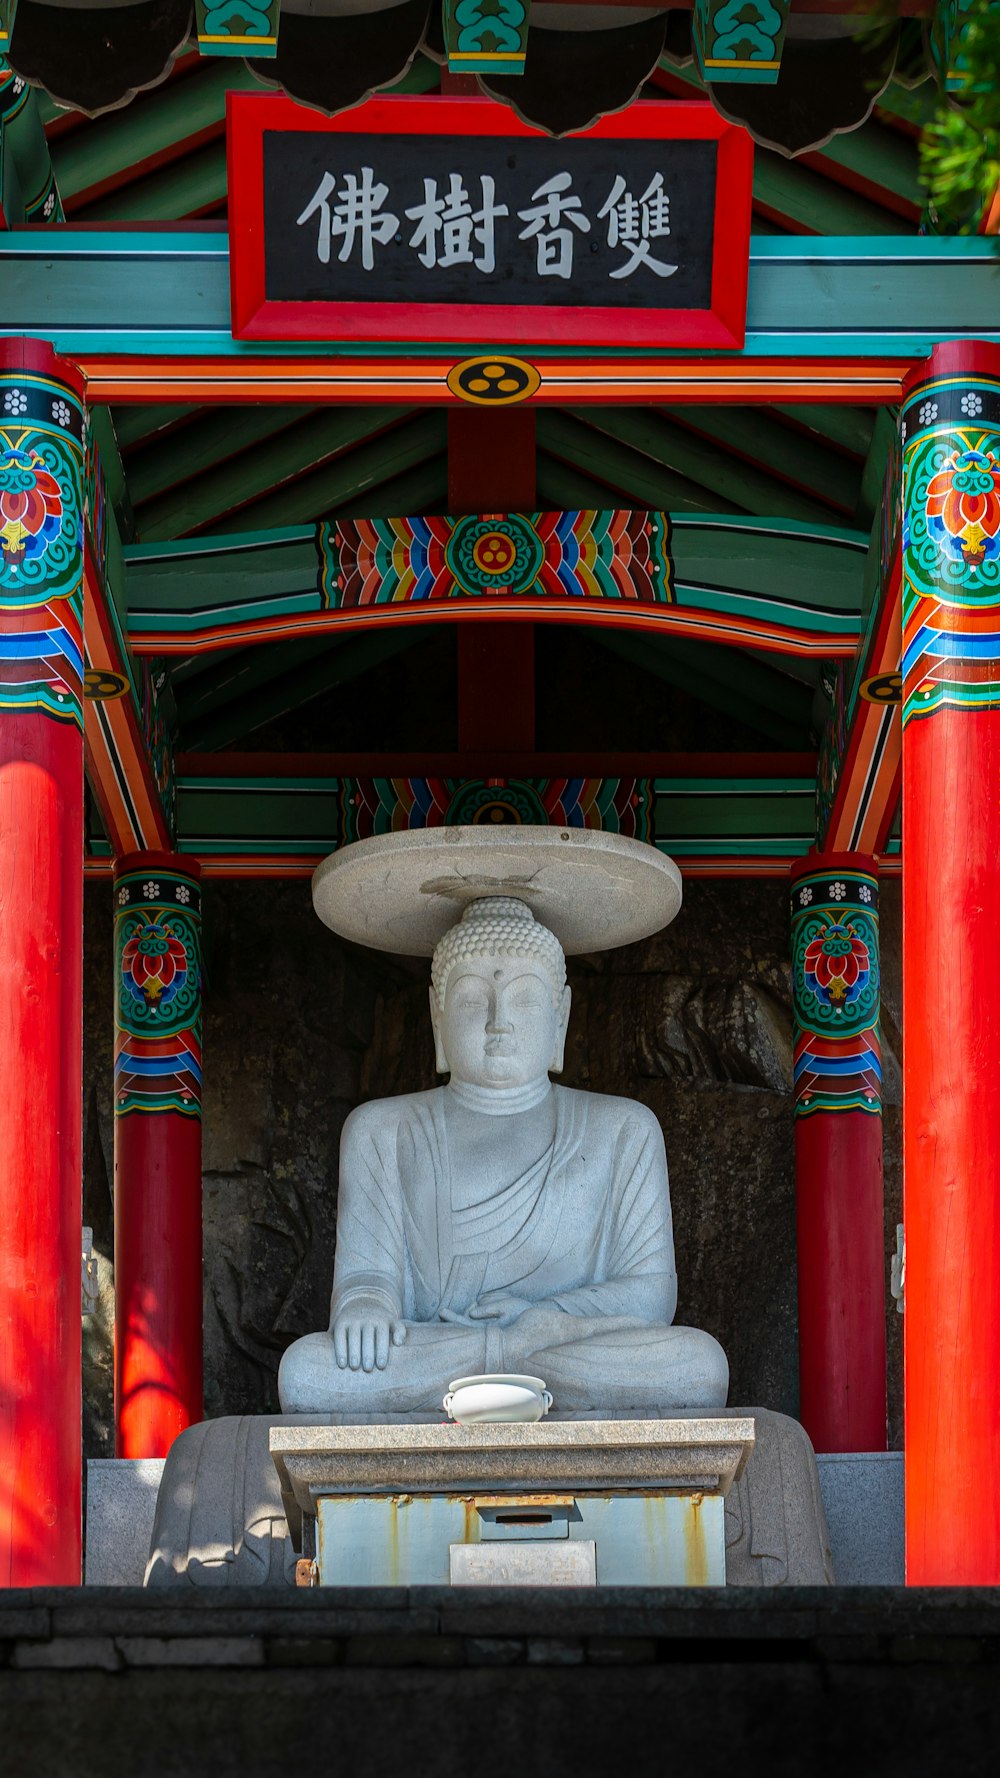 a statue of a person sitting in a chair in front of a colorful wall